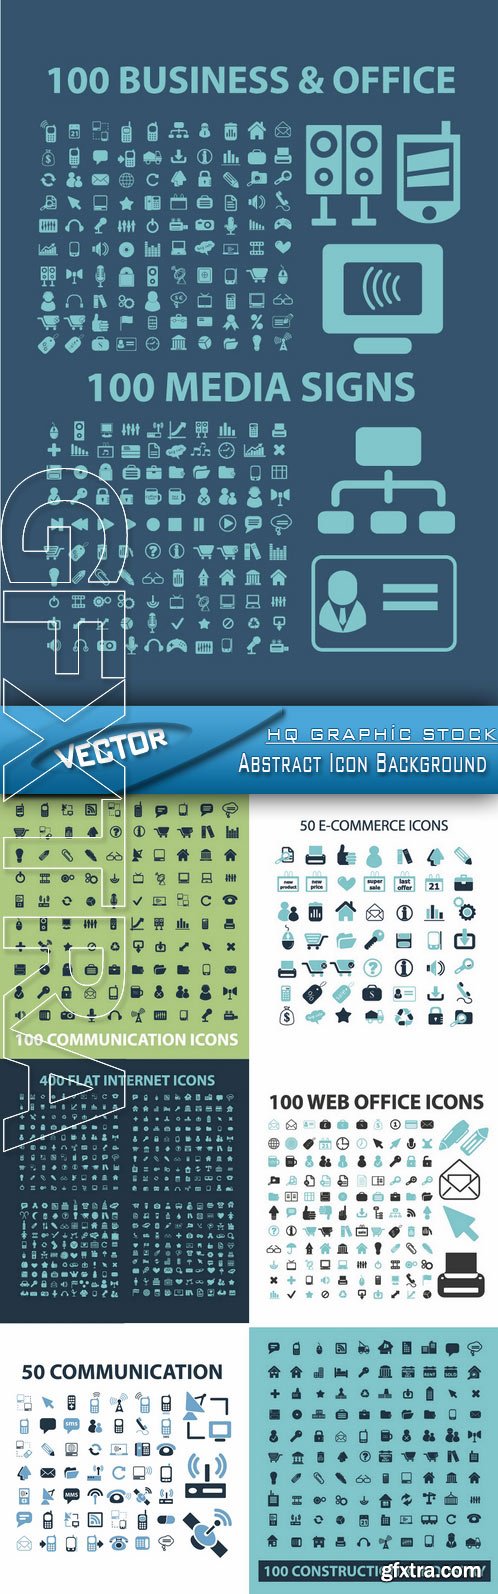 Stock Vector - Abstract Icon Background